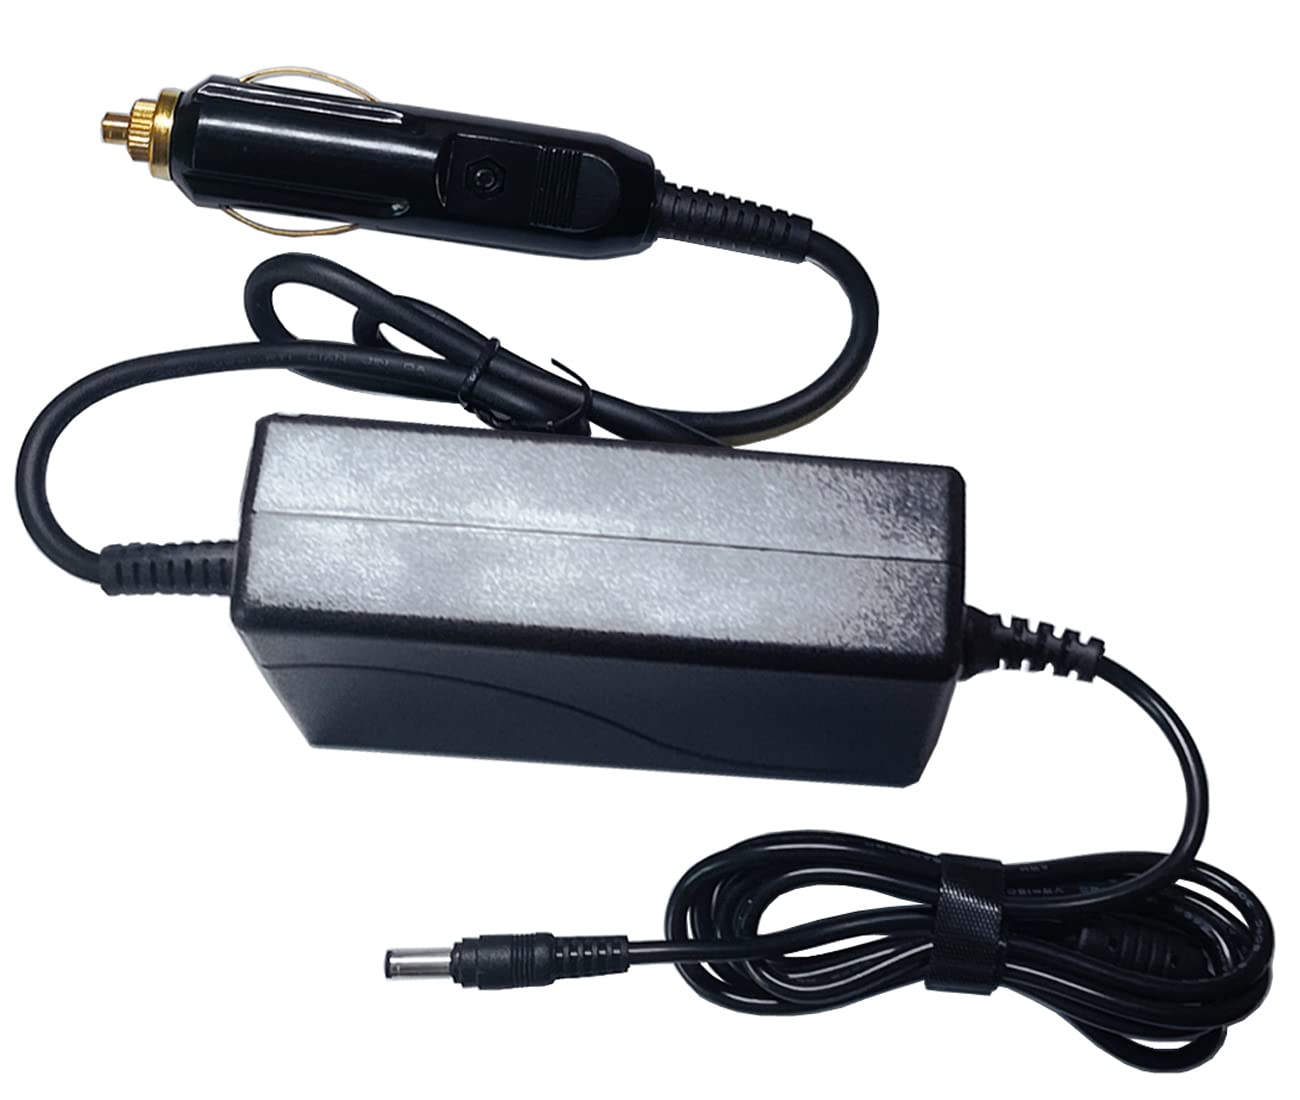 UpBright Car DC Adapter Compatible with 3B Luna Model G3 BPAP 25A LG3700 LG3700W A20 LG3600 LG3500 E3922318301 REF 10230444 REF10230444 CPAP Machine Heated Humidifier Power Supply Cord Battery Charger